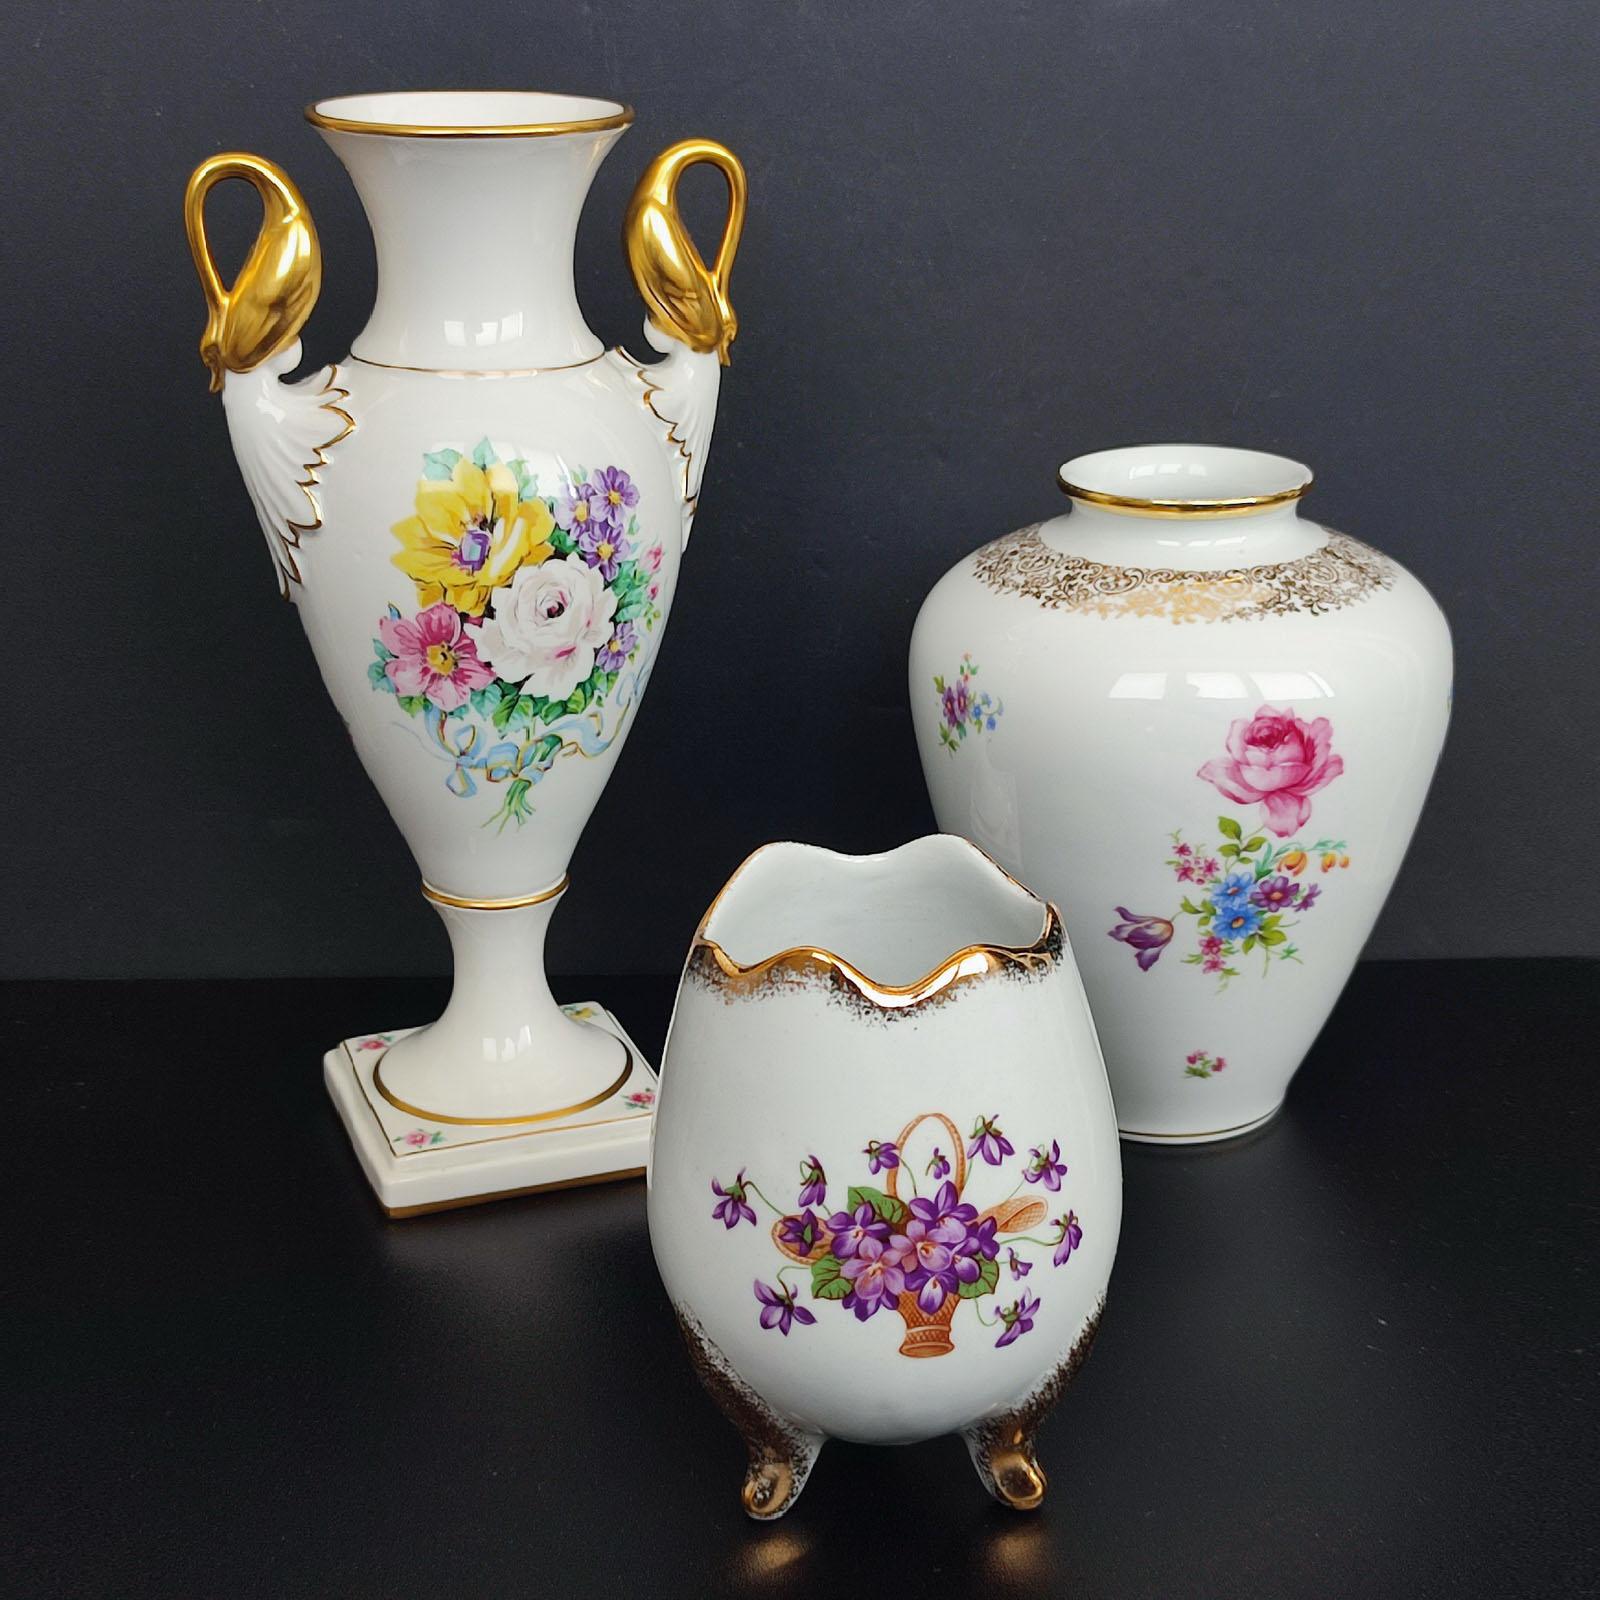 Set of Three German Porcelain Vases, Mid-Century, KPM
Comprising (from left to right):
- a Parbus egg shaped porcelain vase, resting of three gilt feet, height 14 cm, Ø 10 cm
- an Alka Kunst Gold Swans handled vase, height 29 cm, Ø 14 cm
- a KPM